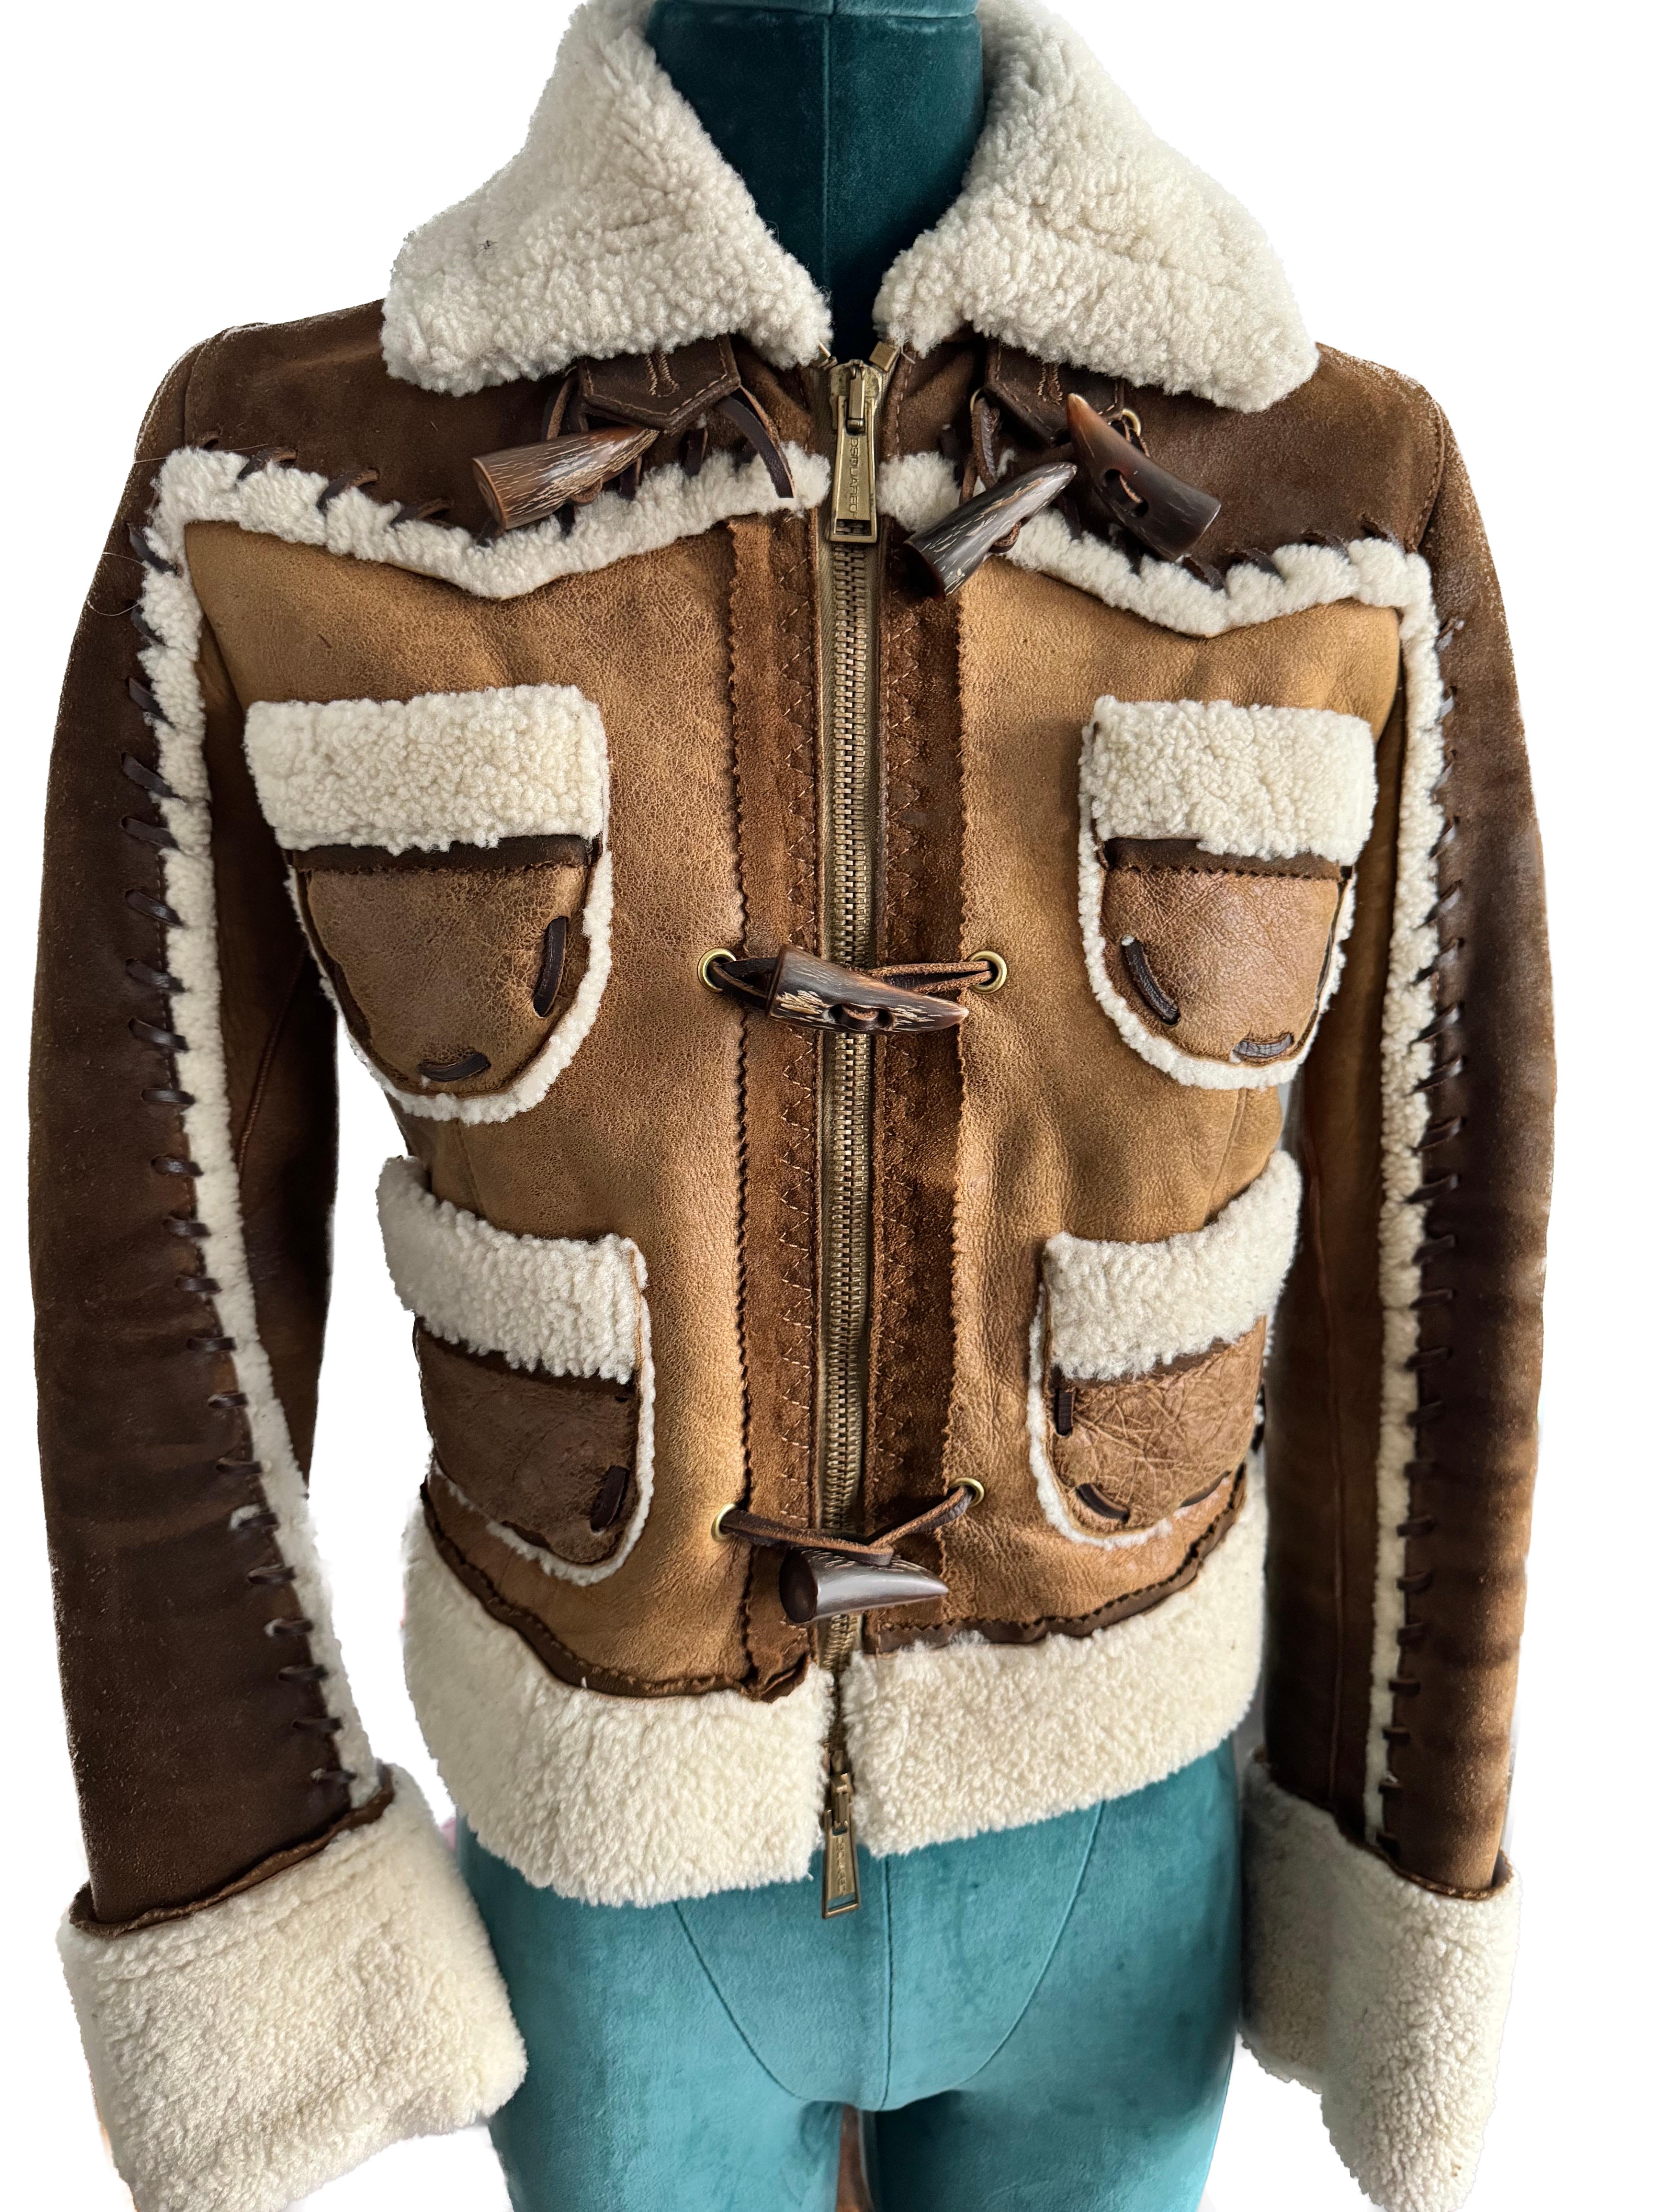 he Dsquared shearling short jacket embodies a luxurious and meticulously crafted design, featuring exquisite details that elevate its style and sophistication.

Crafted from high-quality shearling, this short jacket boasts a plush and cozy texture,